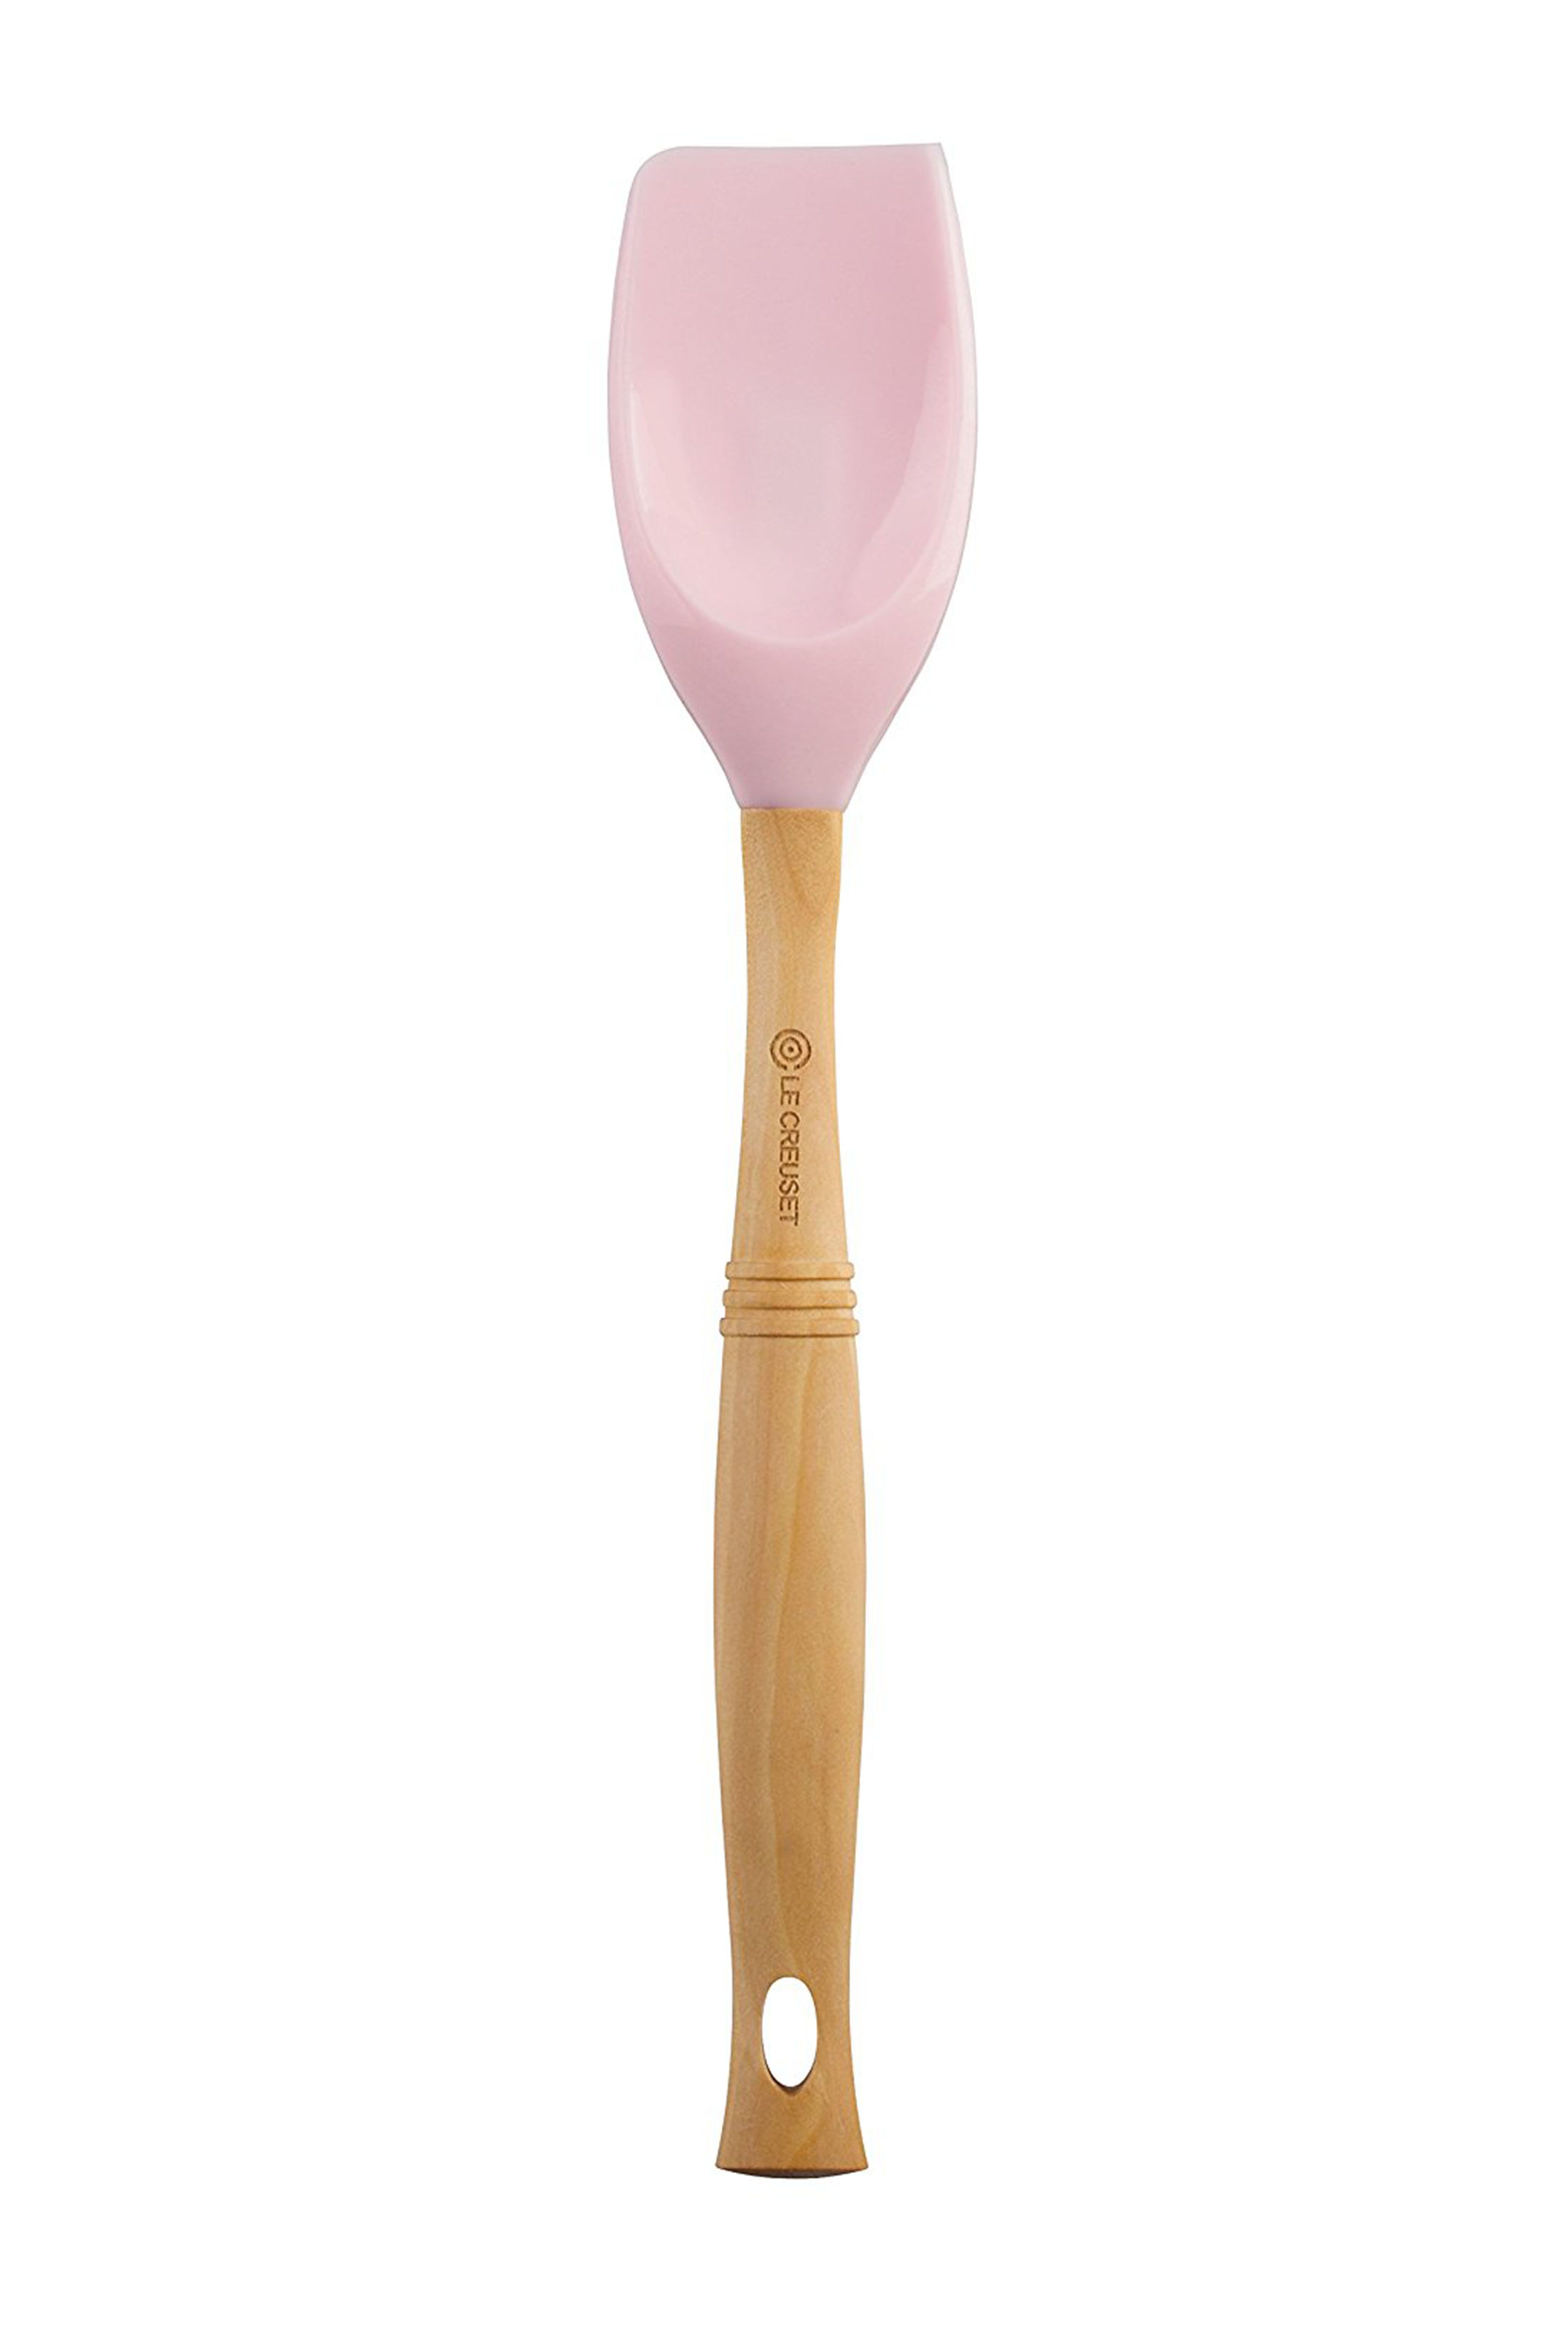 Millennial Pink Kitchen Tools - Millennial Pink Products